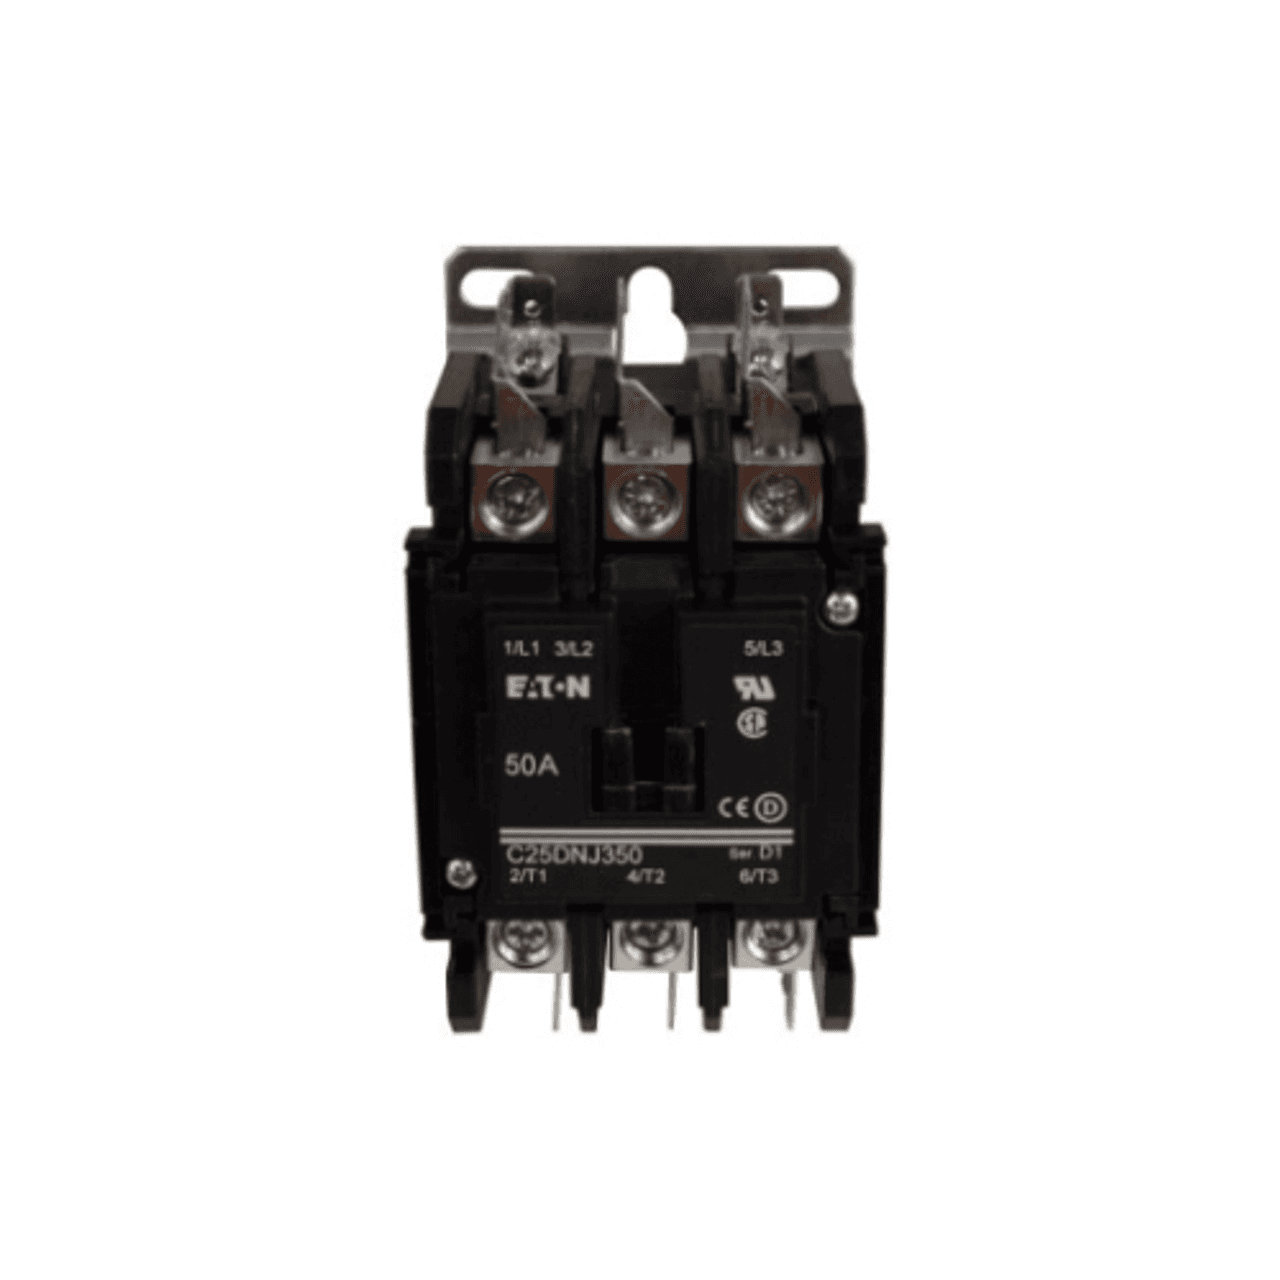 Eaton C25DNJ350T Definite Purpose Control Contactor, Non-reversing, Three-pole, 50A, 24 Vac, 50/60 Hz, Open with metal mounting plate, Box lugs (posidrive setscrew) and quick connect terminals (vertical-in-line), 50A IFL, 65A RL